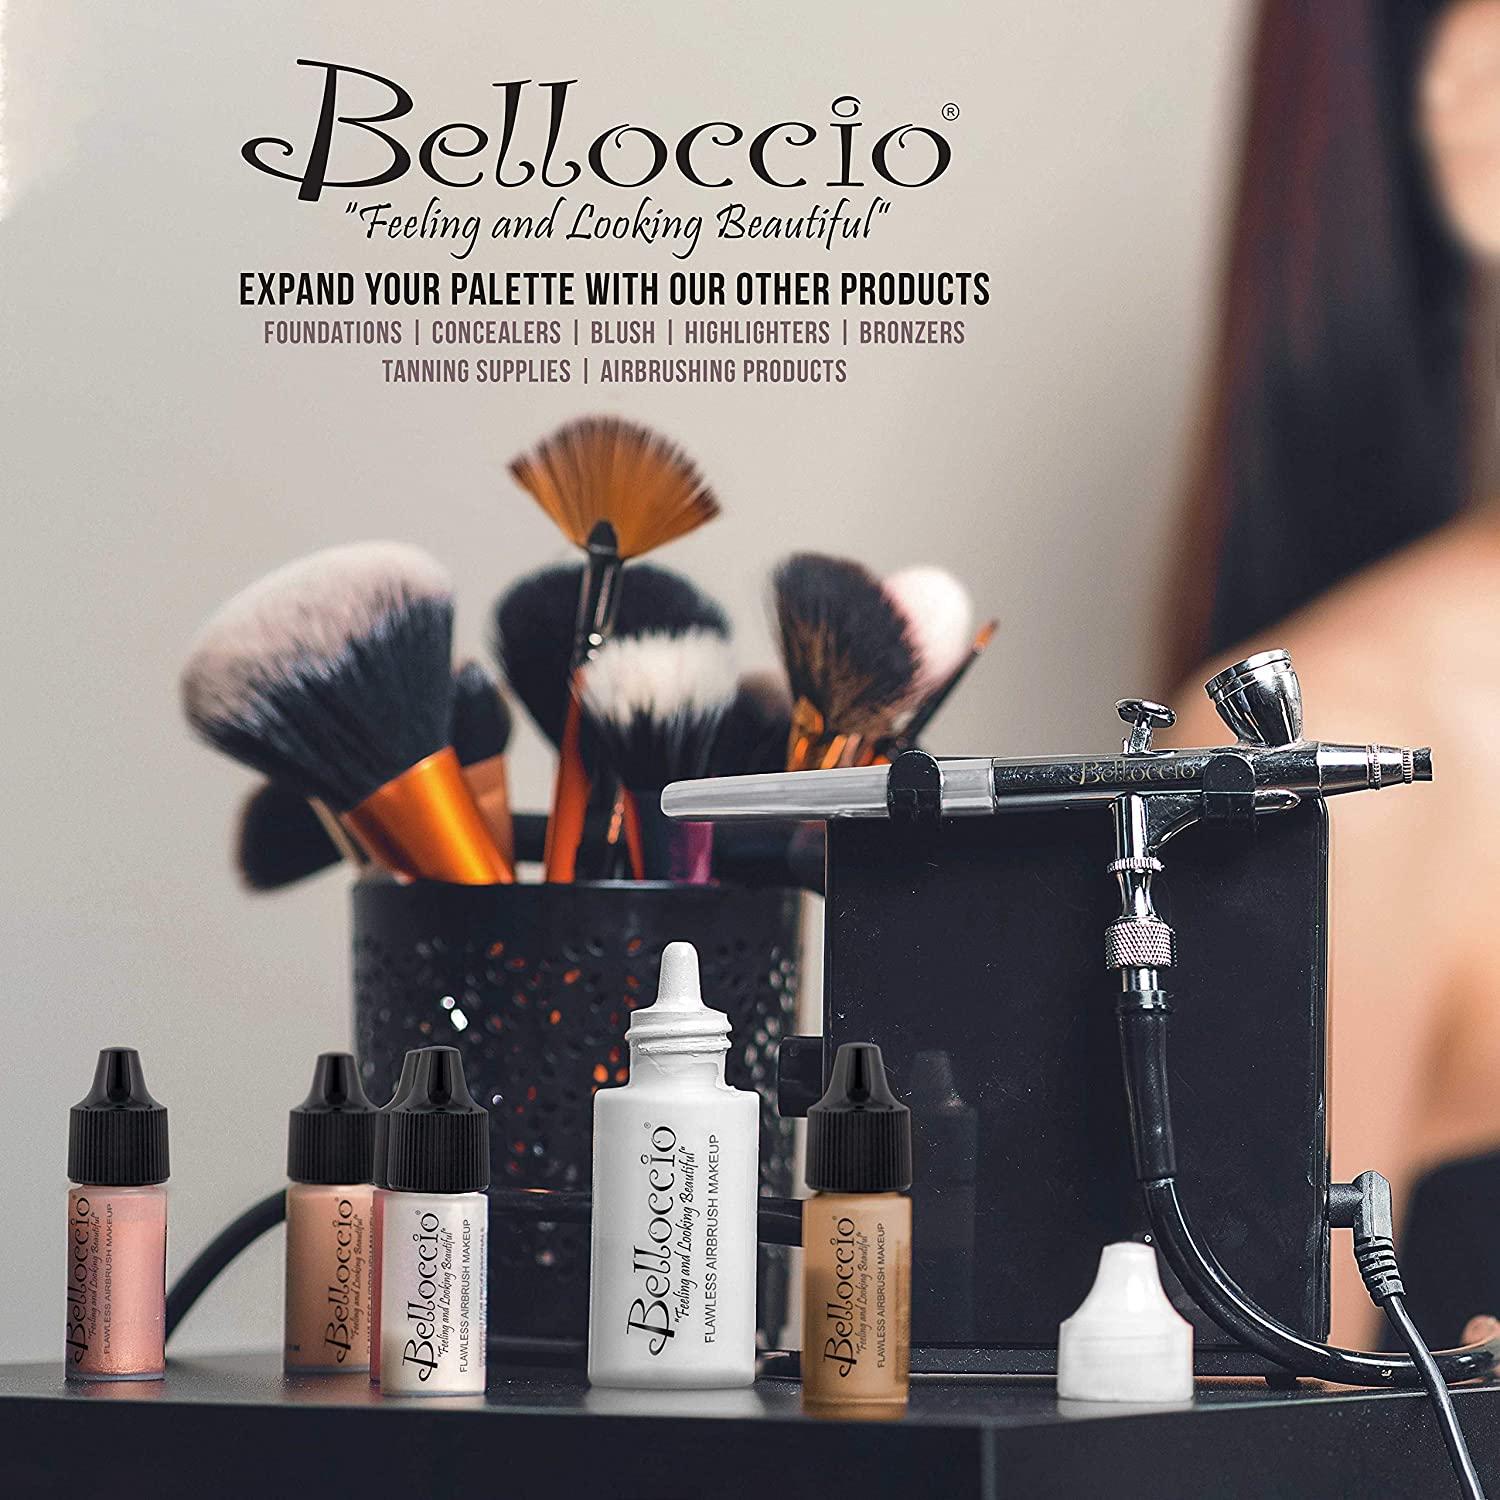 Belloccio Airbrush Cosmetic Makeup System with a MASTER SET of All